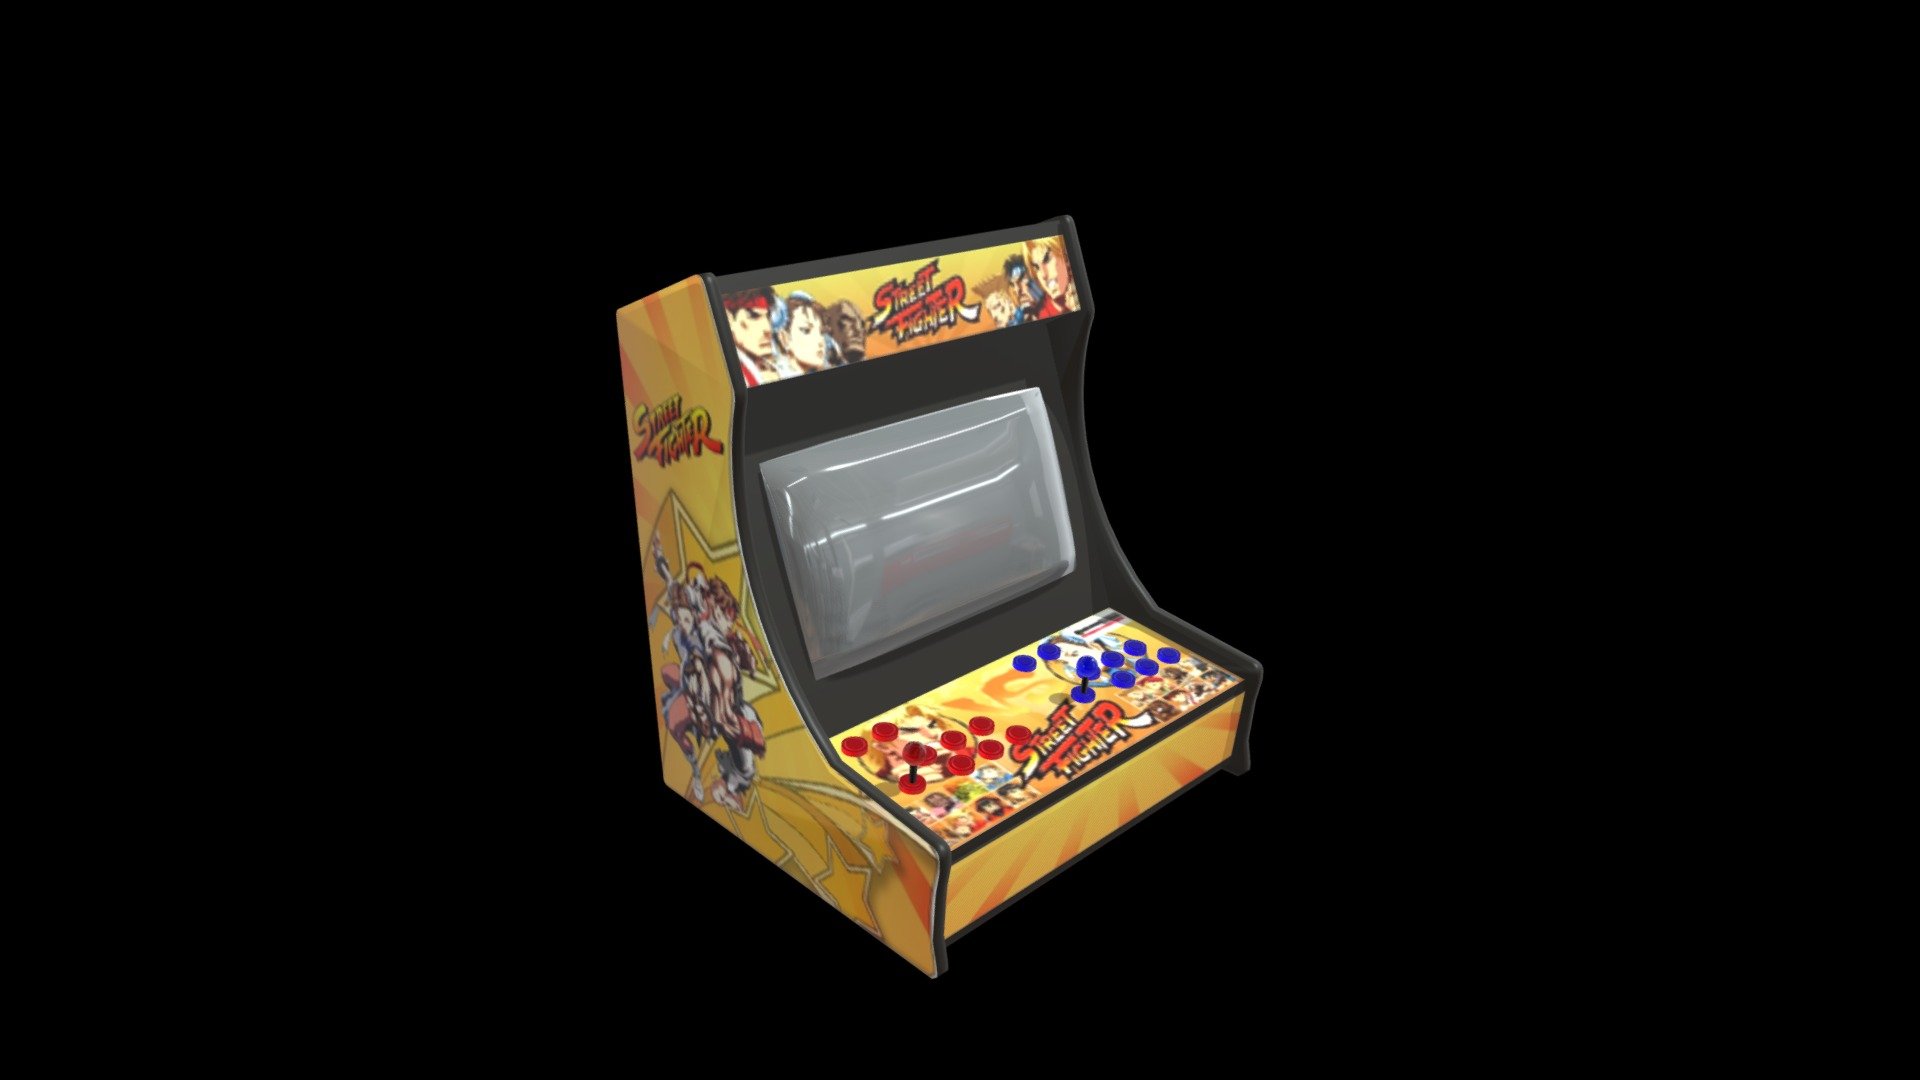 Street Fighter branded retro arcade game. This gem of an arcade game sold by https://thatsretro.ie/. To buy your very own full-size, bartop or handheld arcade with over 8000 retro games preloaded go to the thatsretro website 3d model